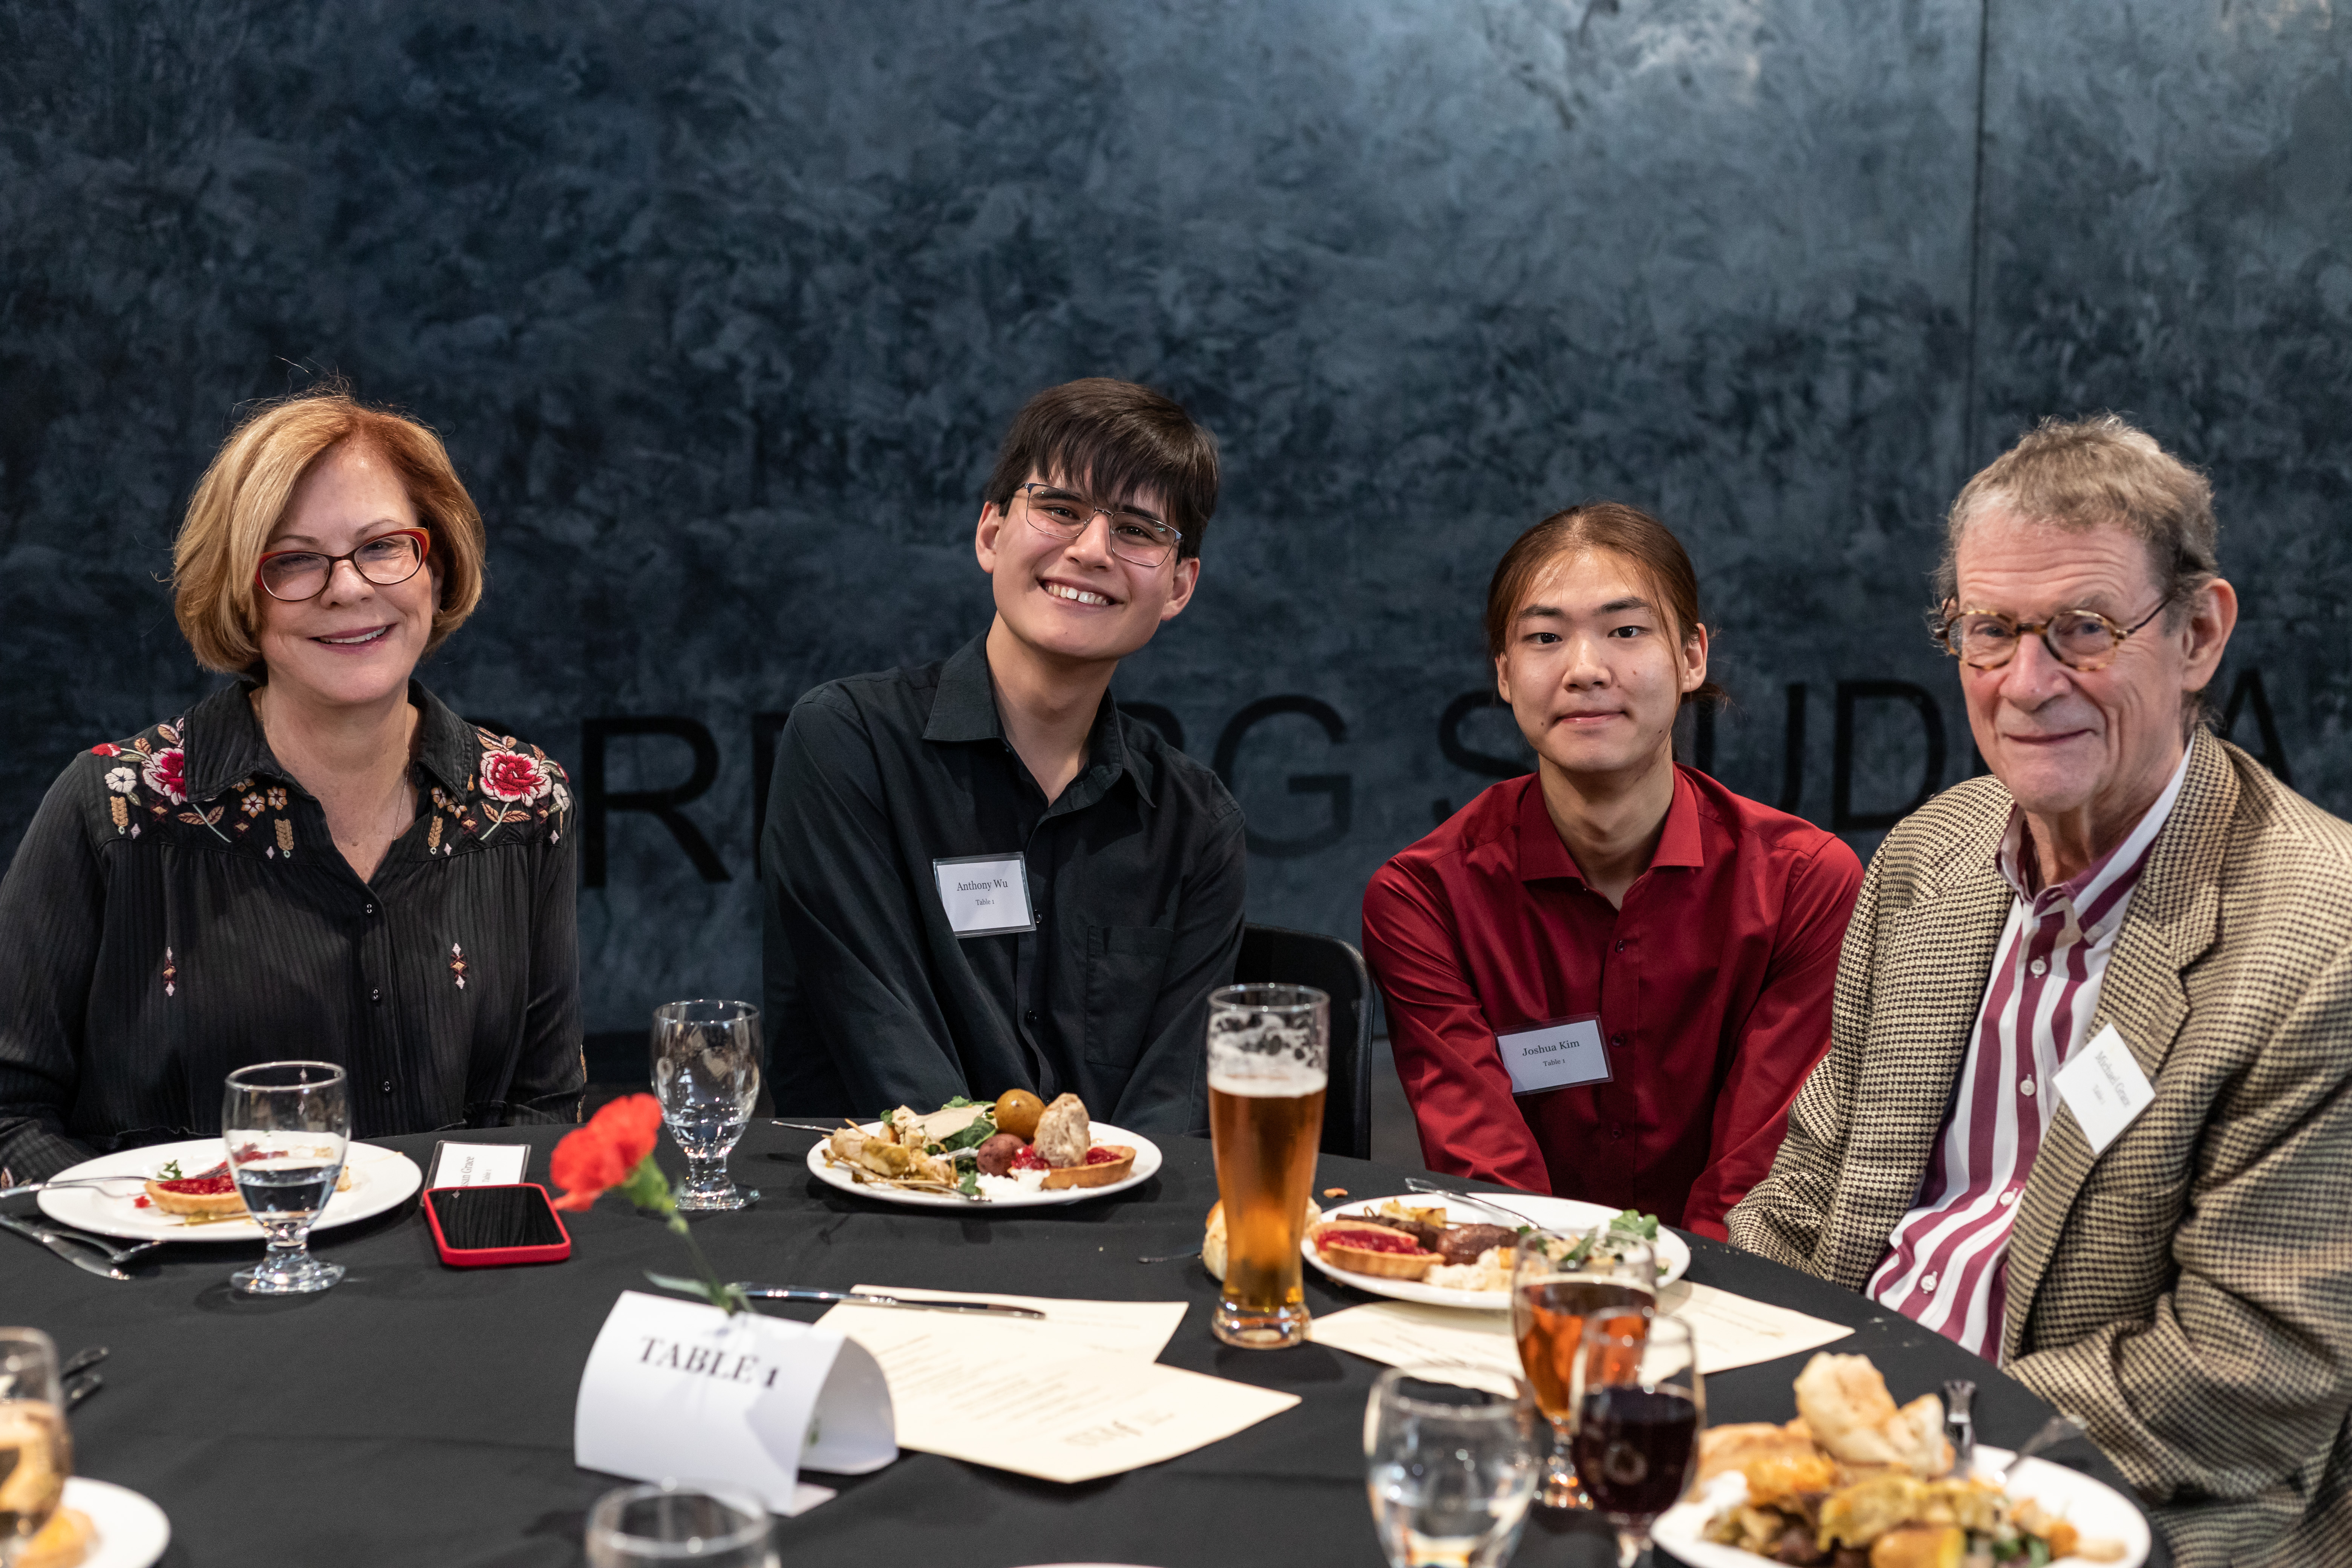 Music Director Susan Grace and Michael Grace with sponsored Fellows Anthony Wu and Joshua Kim <span class="cc-gallery-credit">[Sienna Busby]</span>